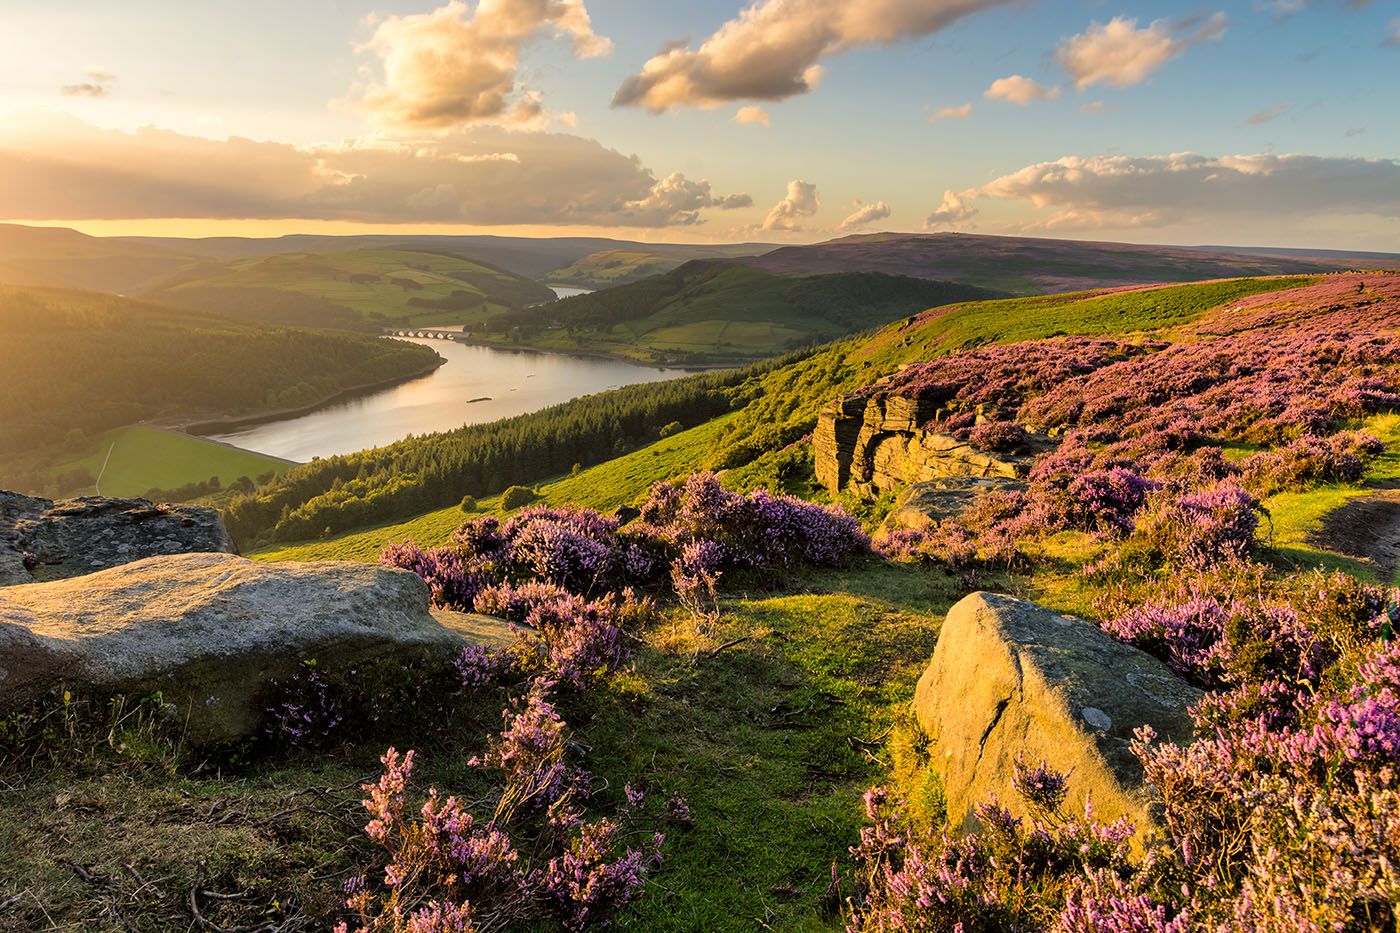 Why visit the Peak District: Here are 10 reasons to visit in 2021